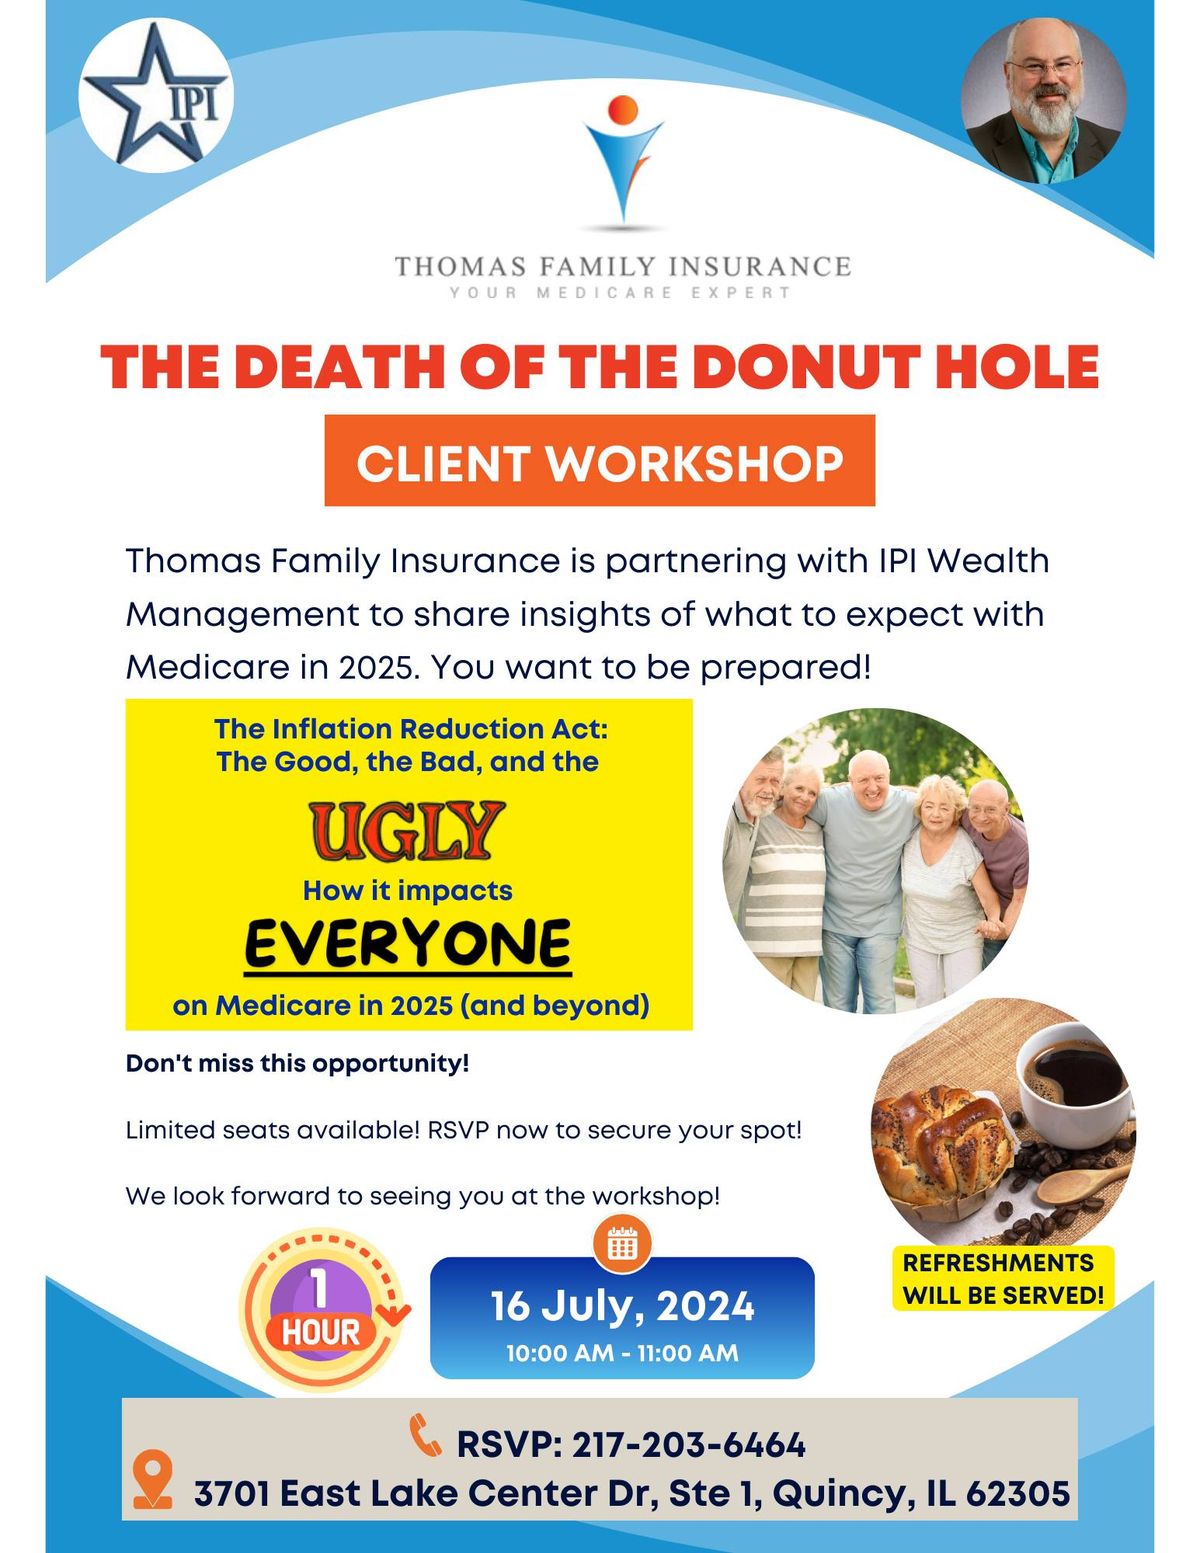 Death of the Donut Hole - What to Expect with Medicare in 2025